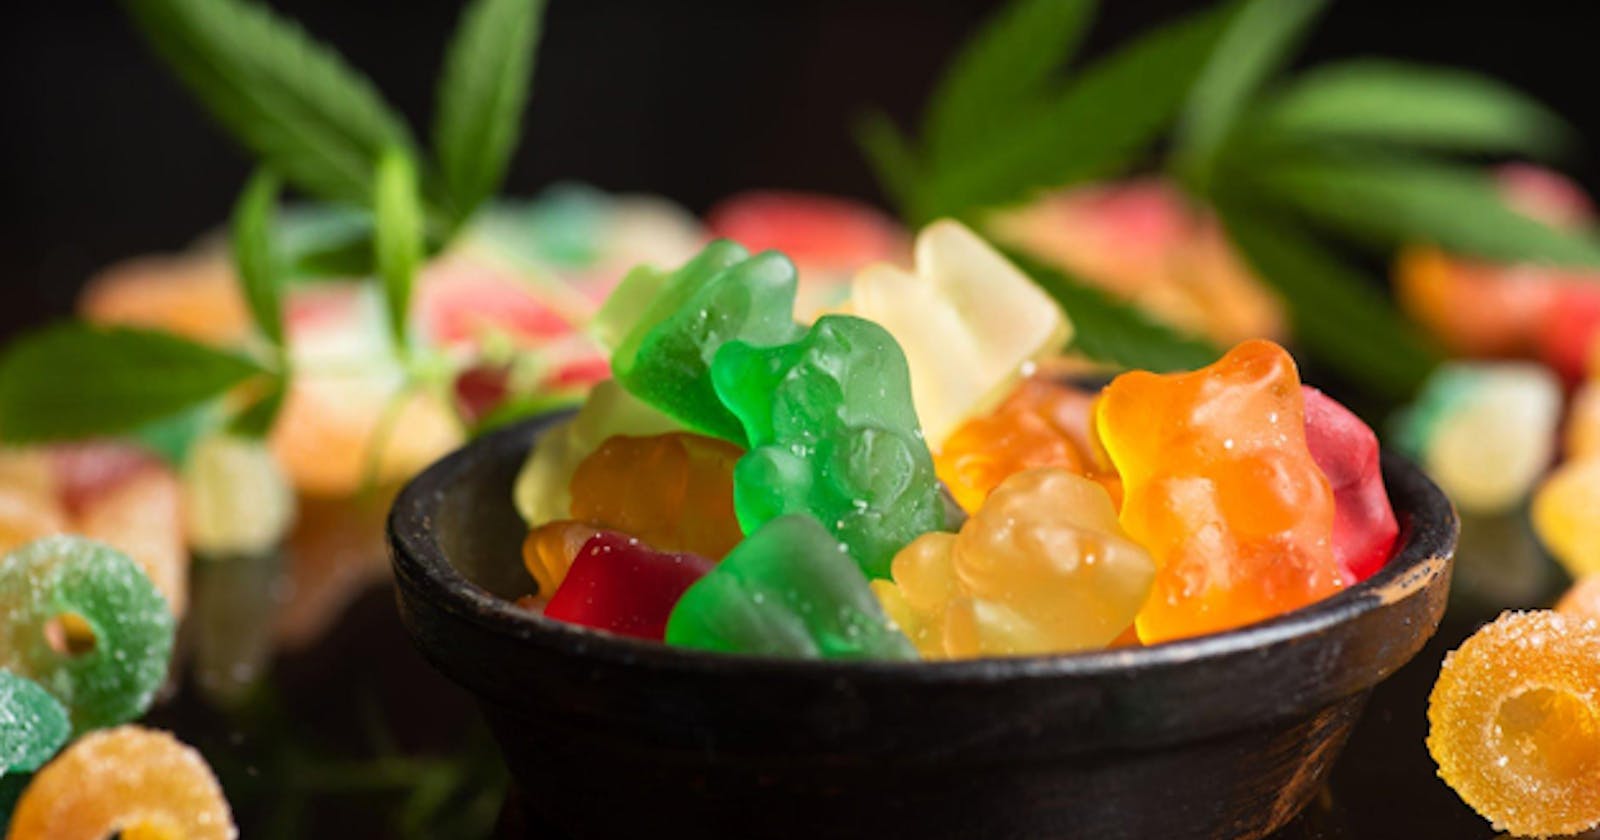 Charm Leaf CBD Gummies : WHAT ARE CUSTOMERS SAYING? KNOW THE TRUTH!